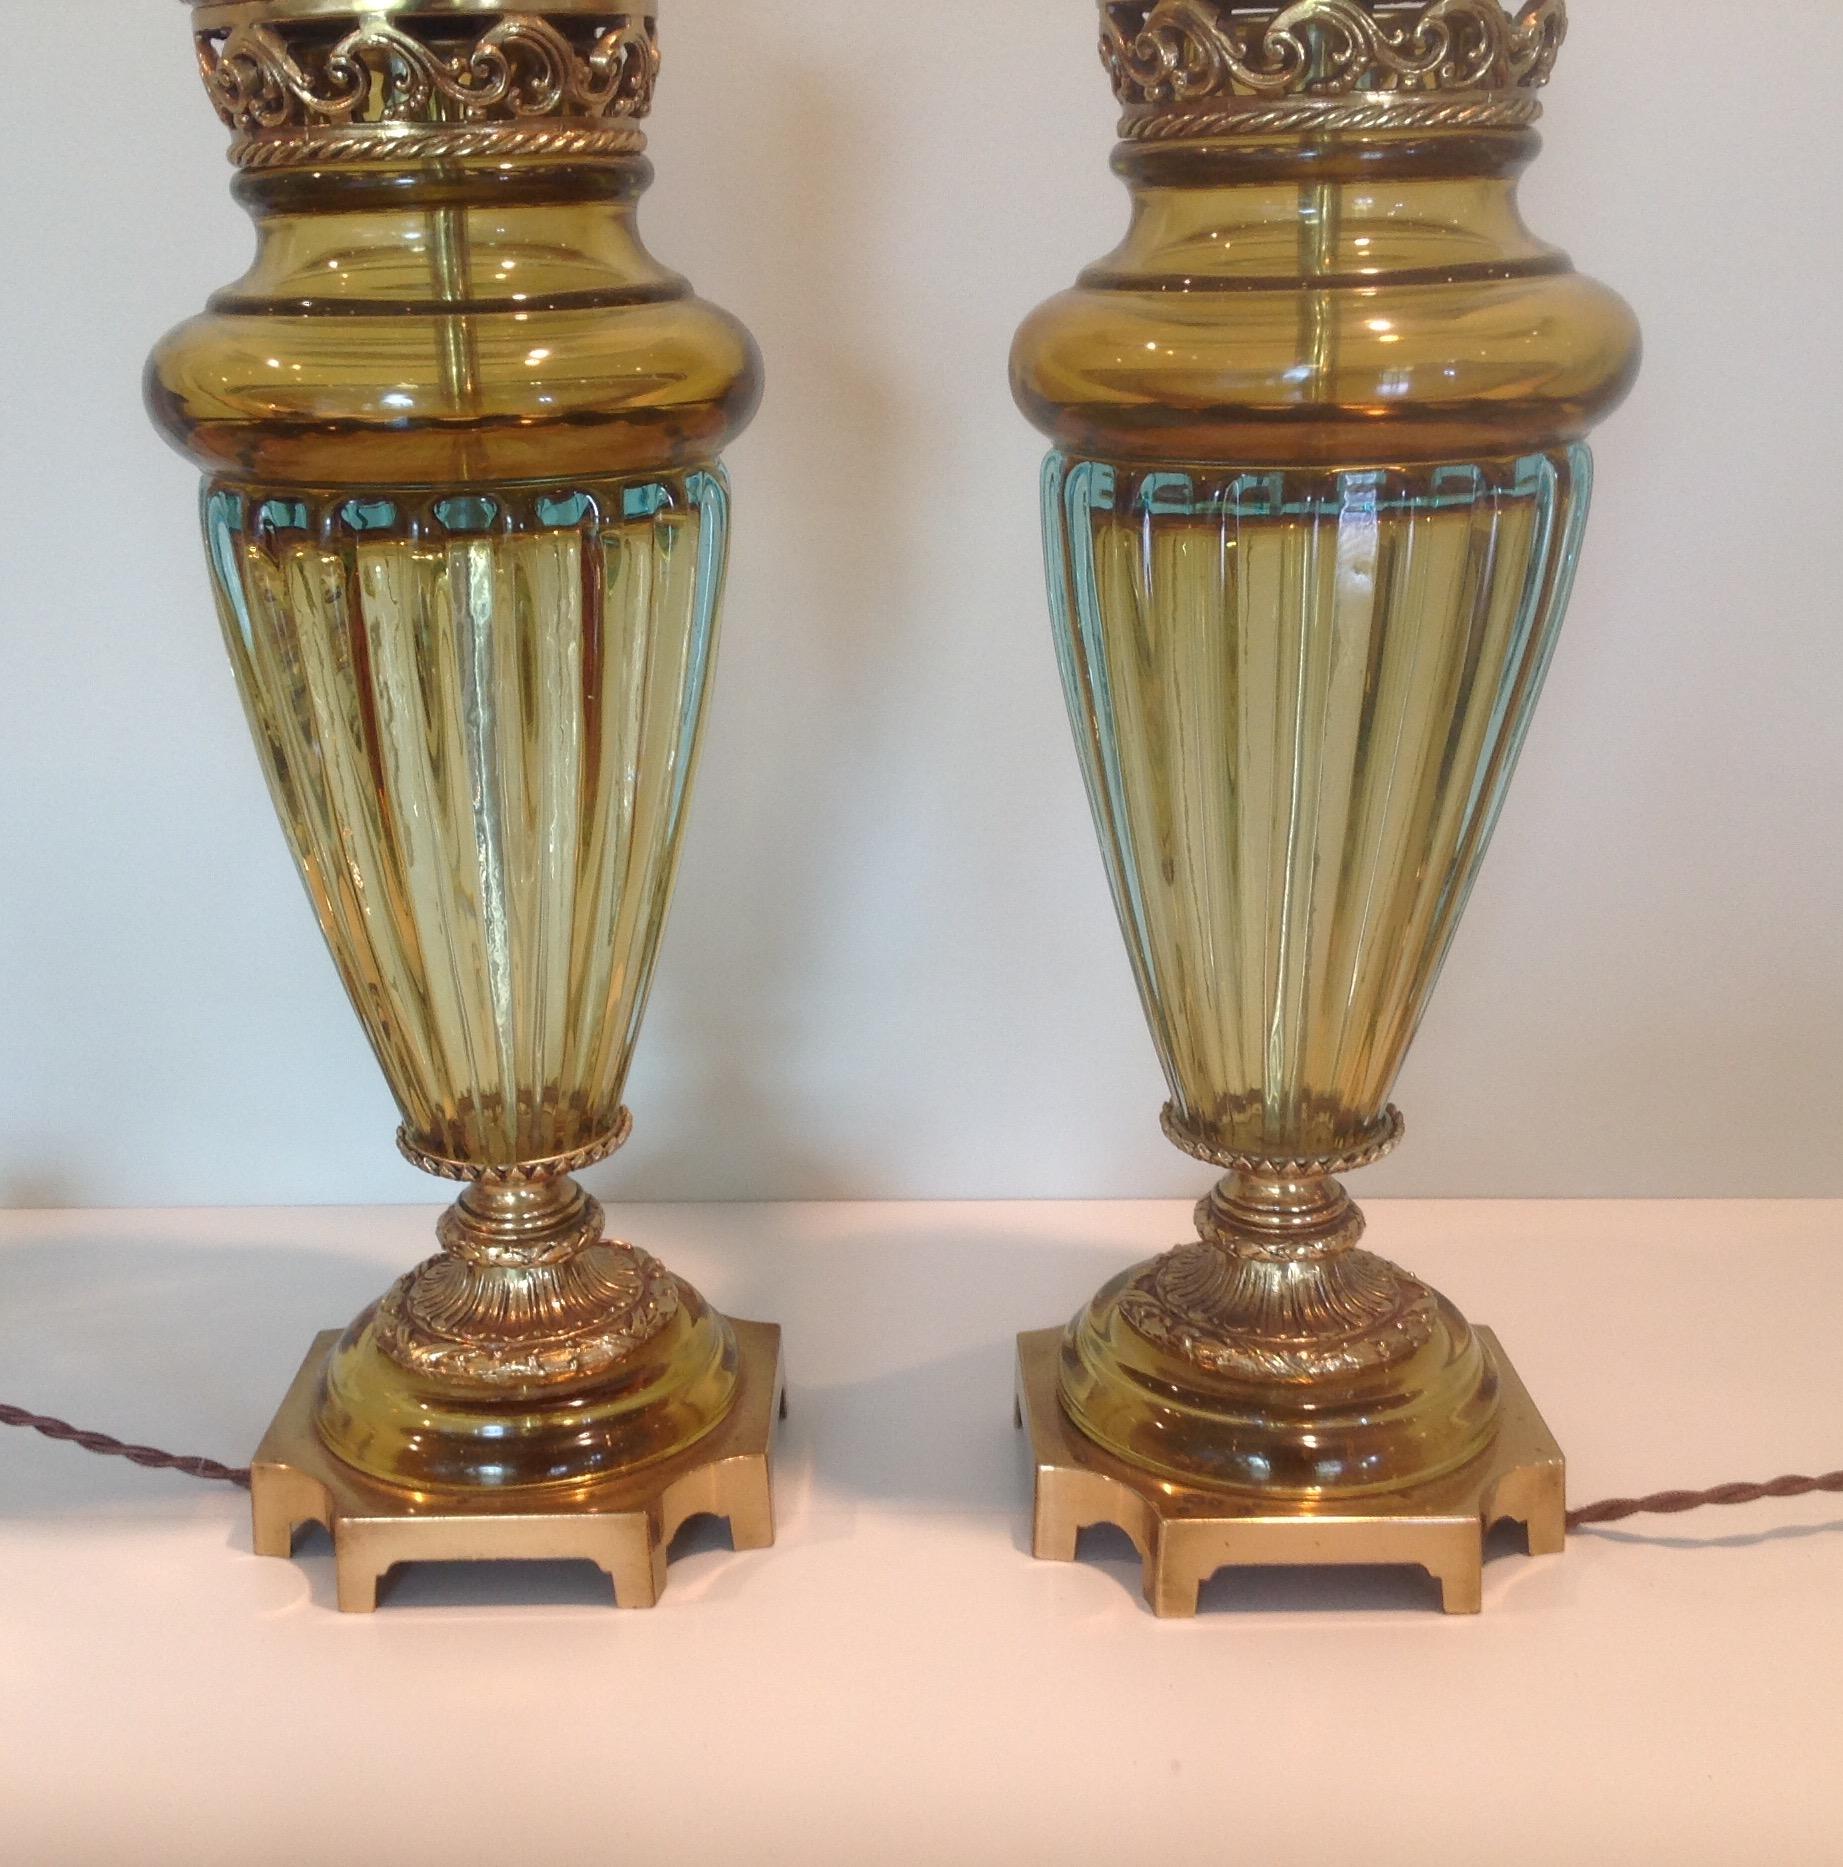 Vibrant yellow or gold Sommerso lamps with blown glass by Archimede Seguso for the Marbro Lamp Company.